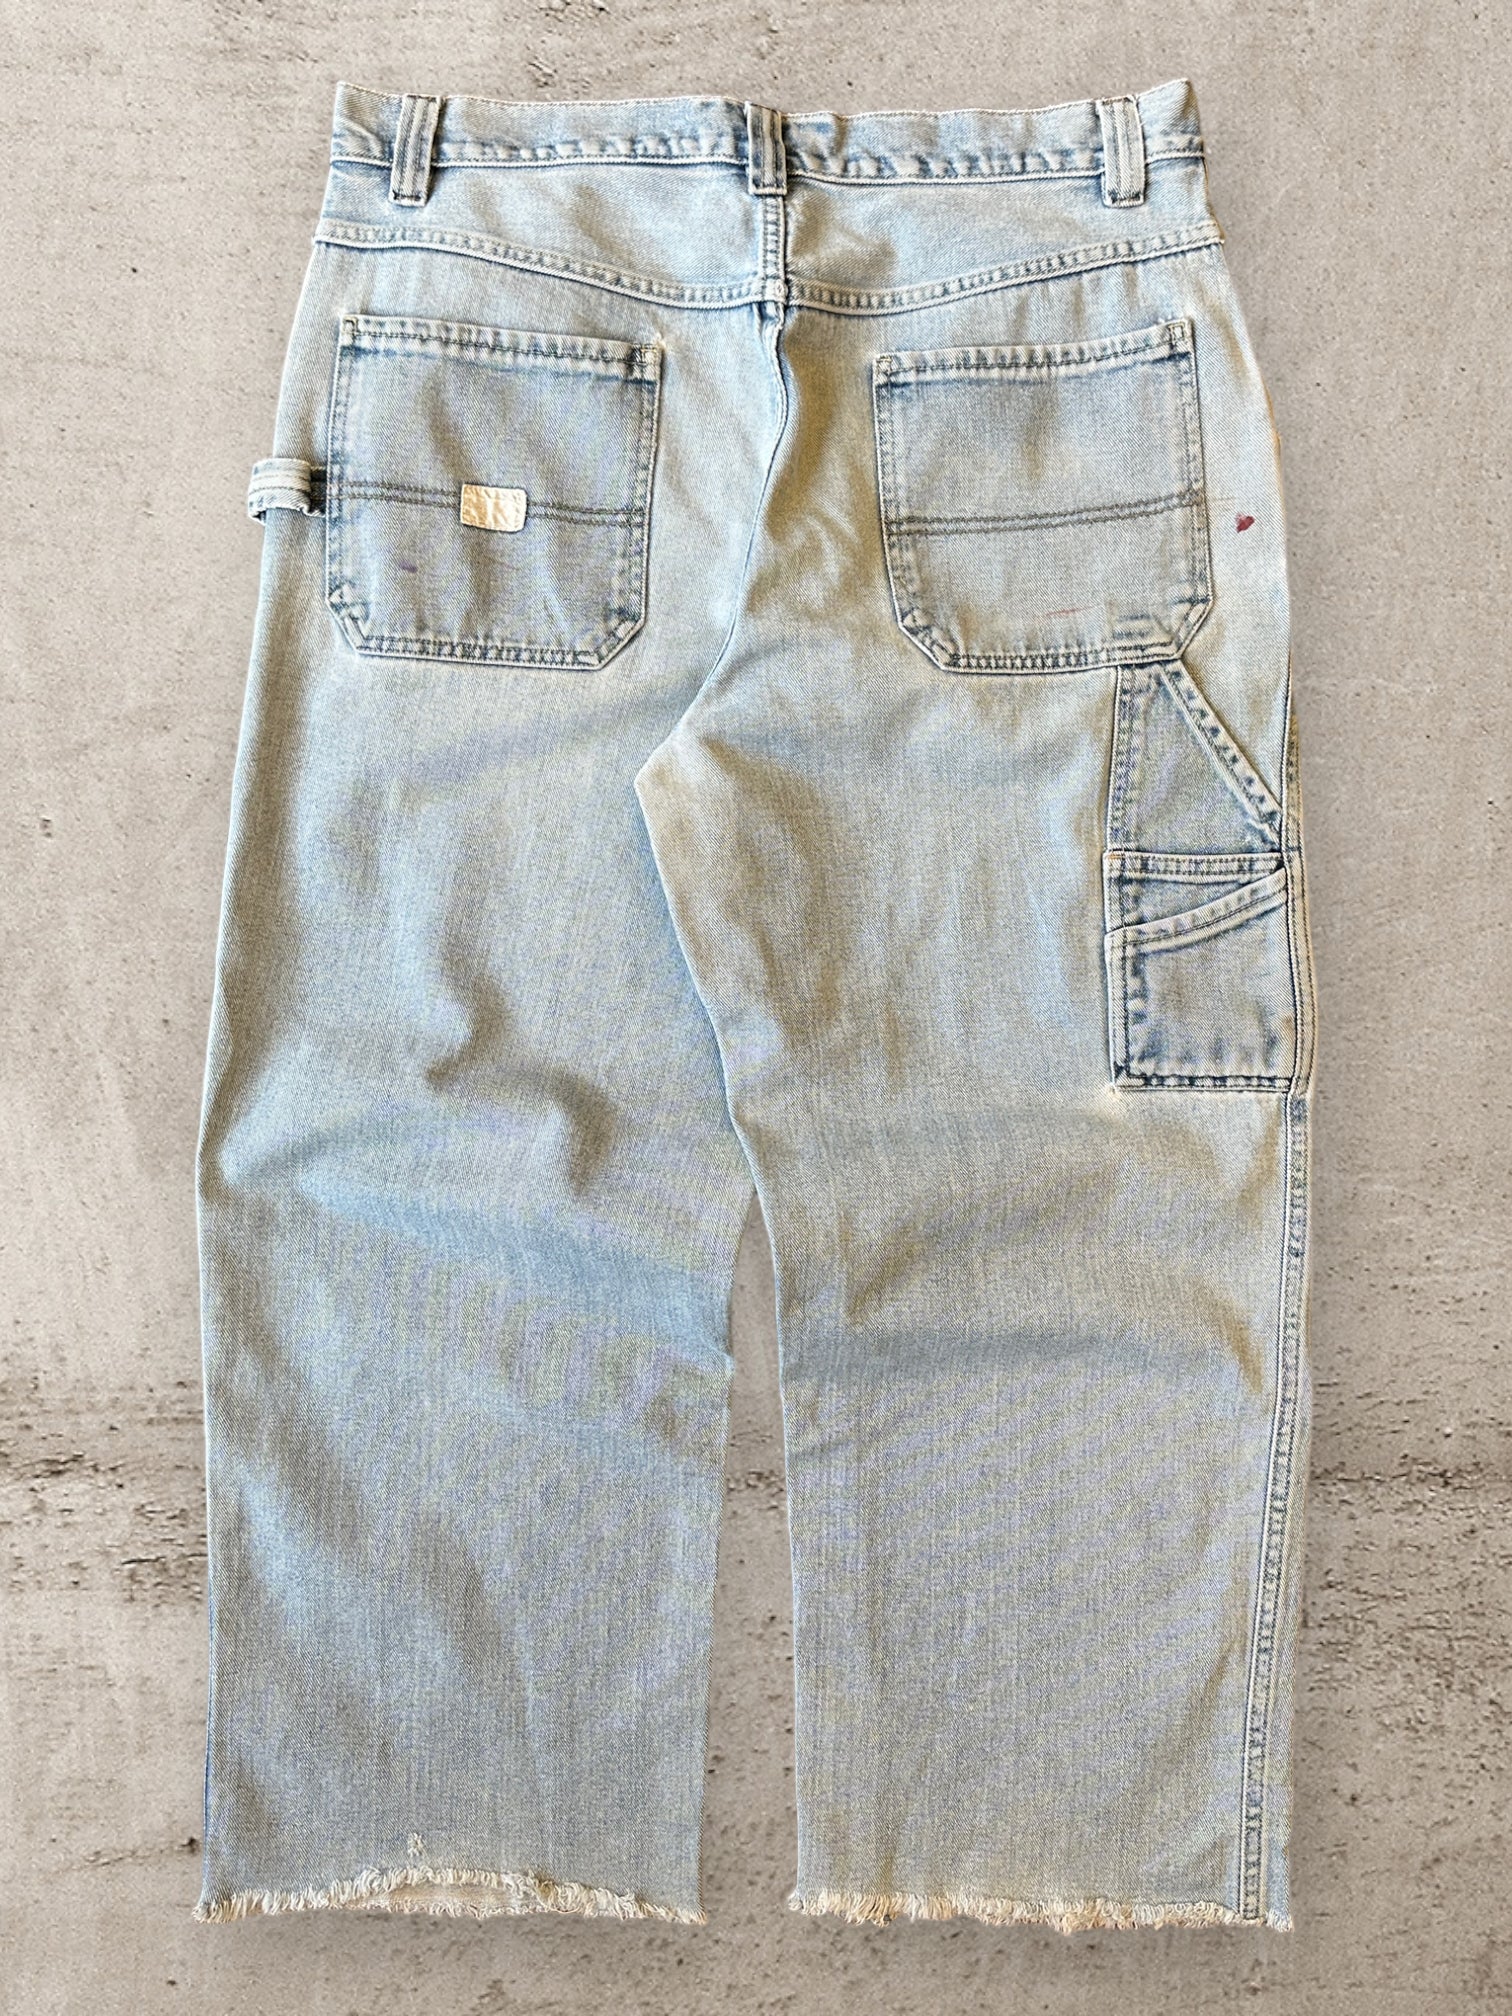 00s Old Navy Faded Light Wash Painter Denim Jeans - 36x27